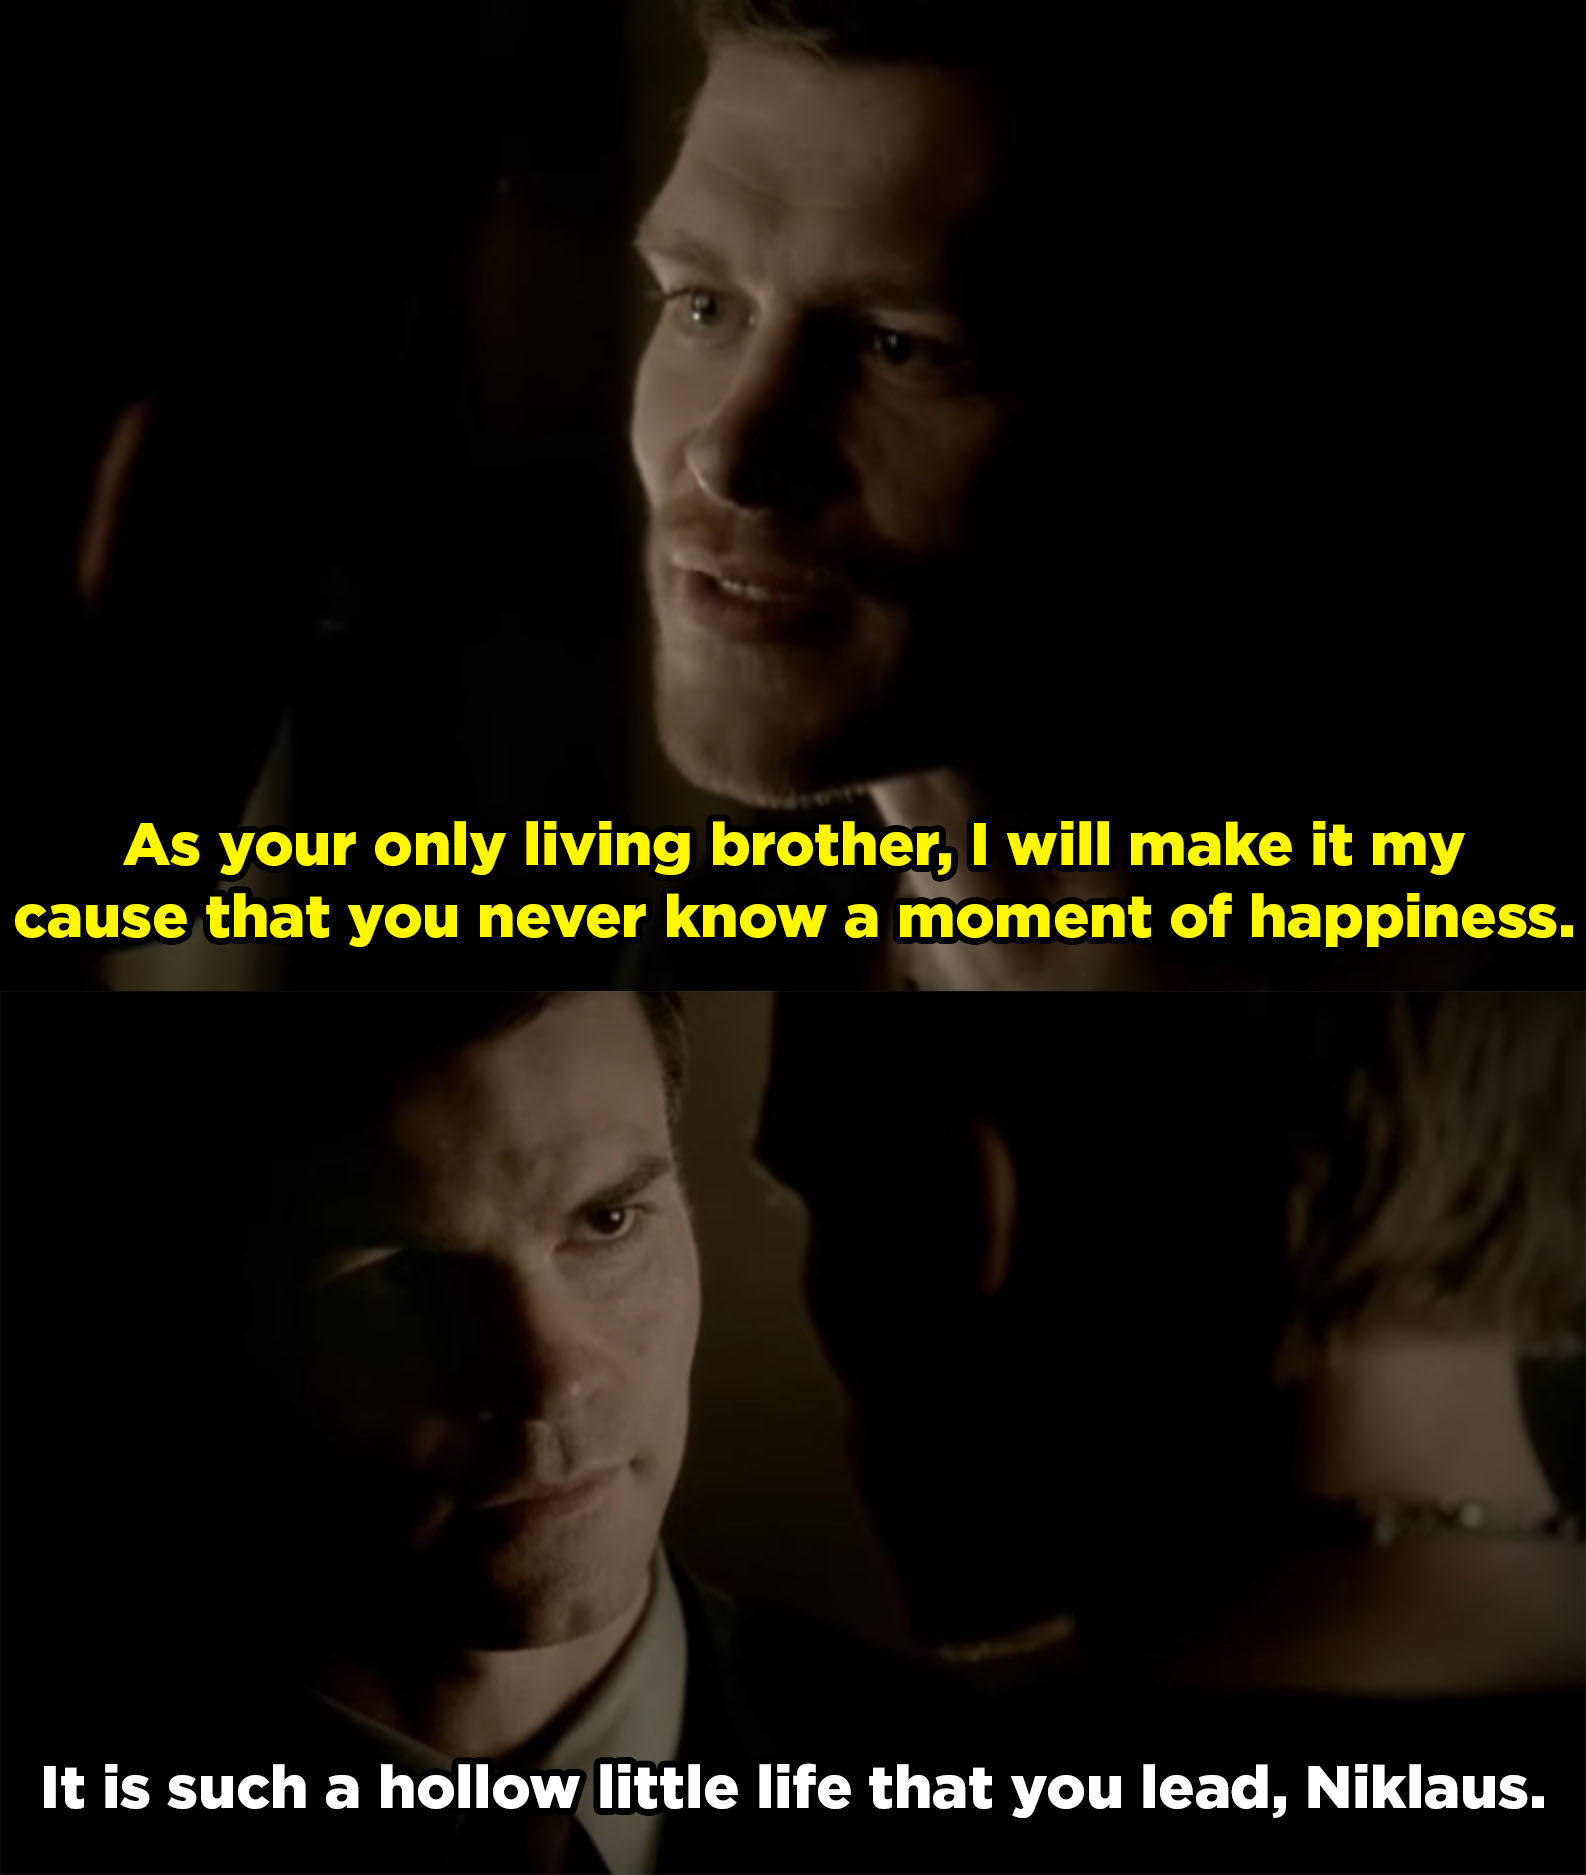 elijah and klaus talking to each other